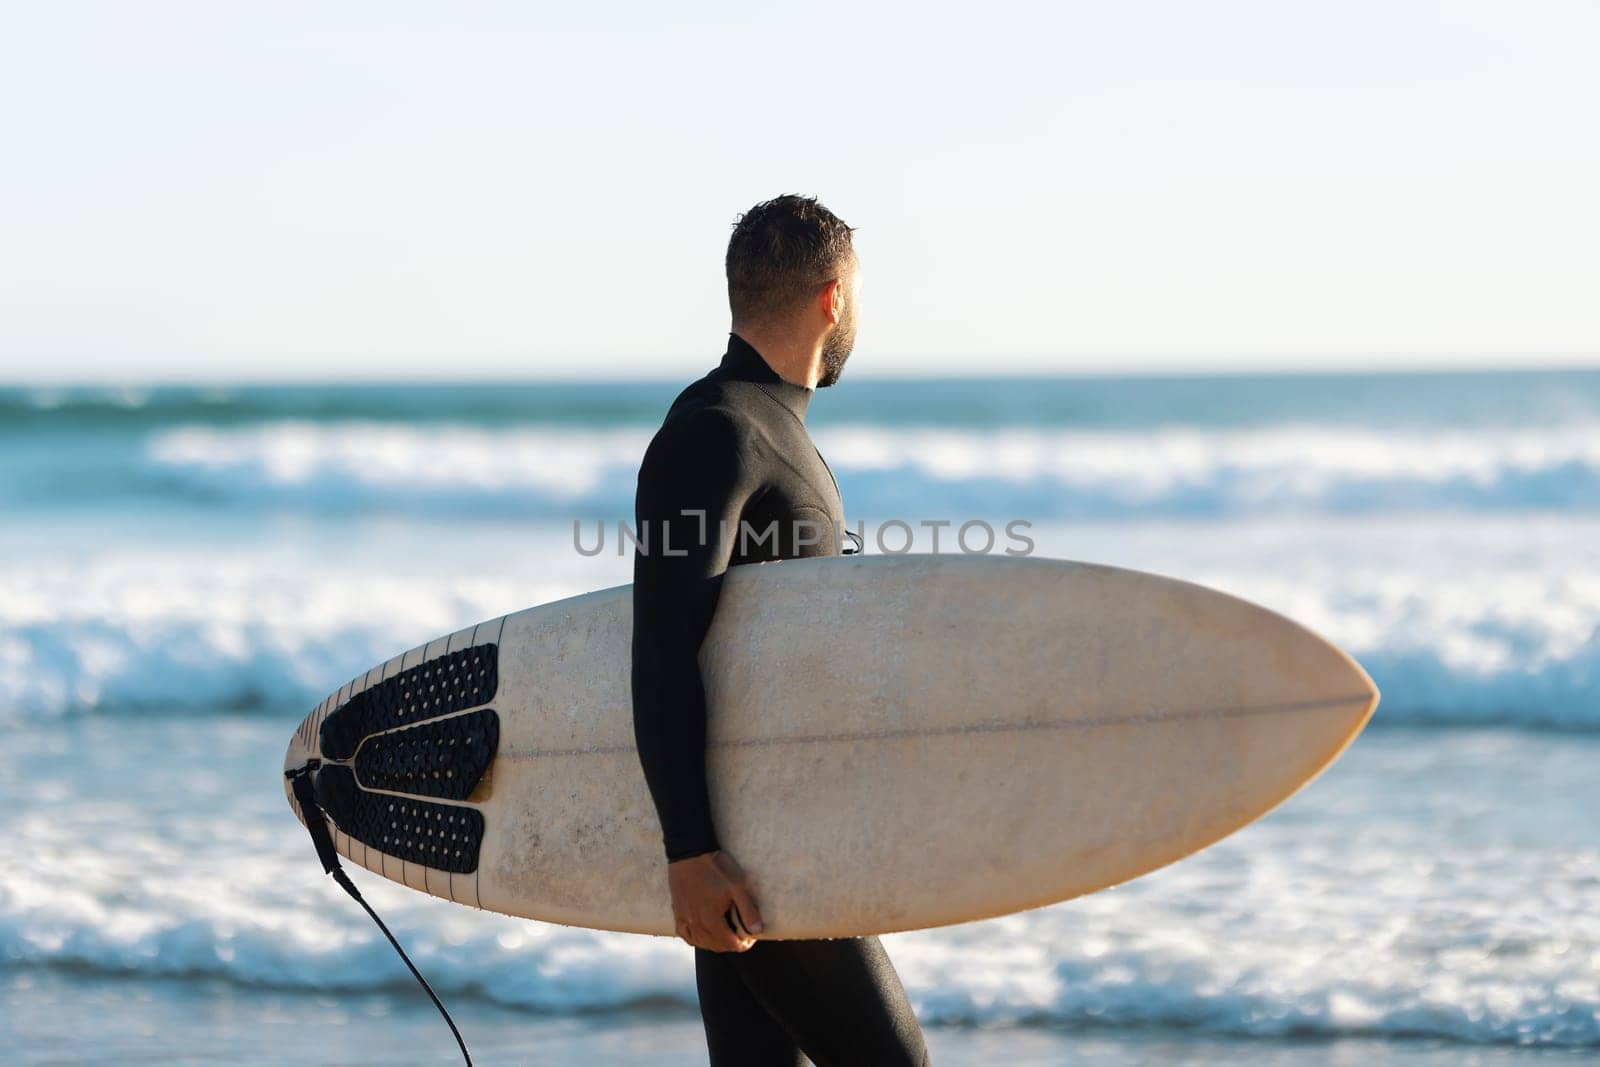 A man surfer in a wetsuit walking on the shore holding a surfboard and looking at the sea. Mid shot